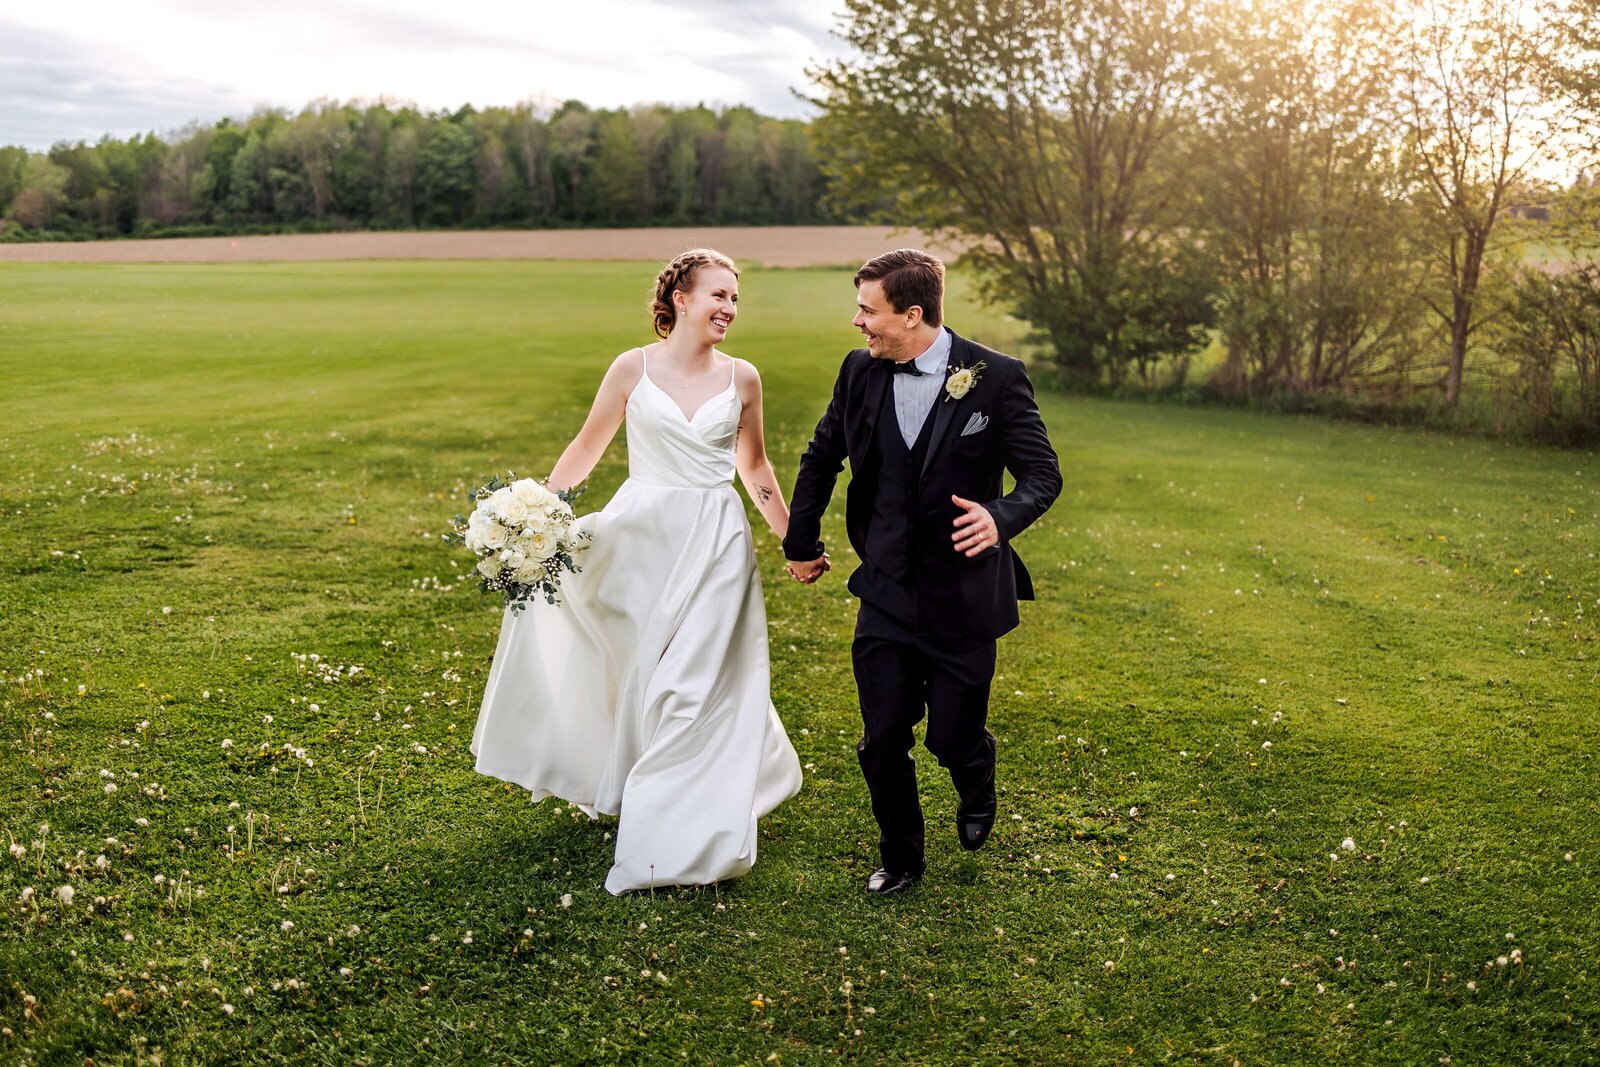 Newly wed couple runs hand in hand at Nick's Place in Edinboro, PA